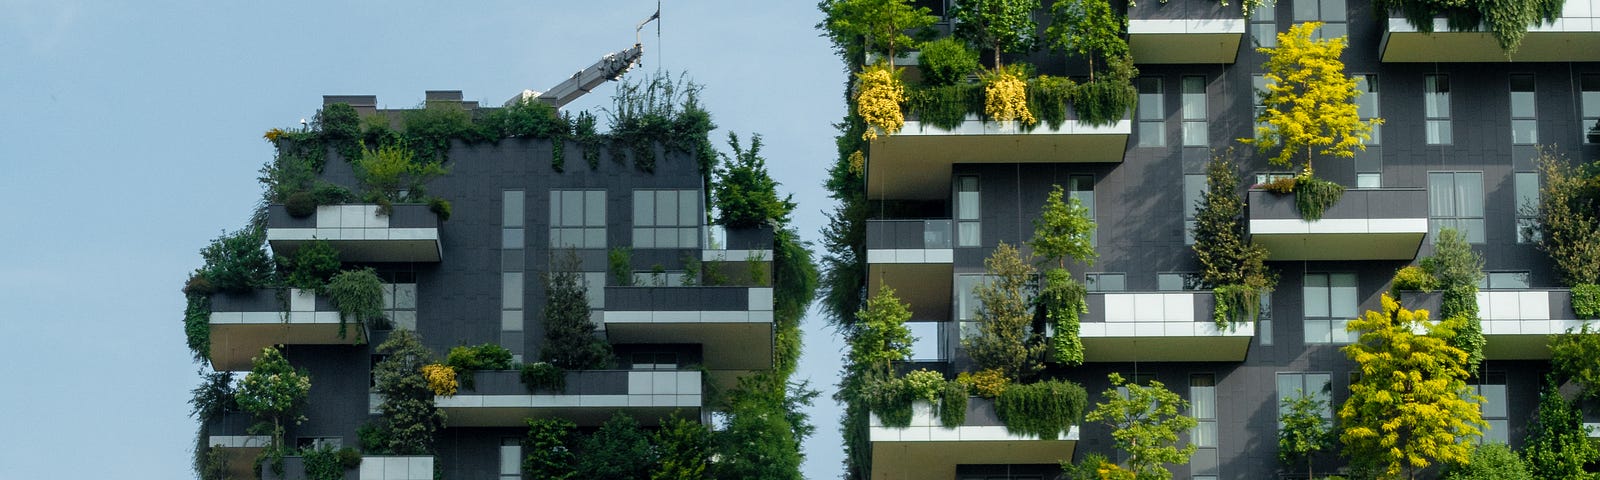 Bosco Verticale, two apartment blocks covered in plants